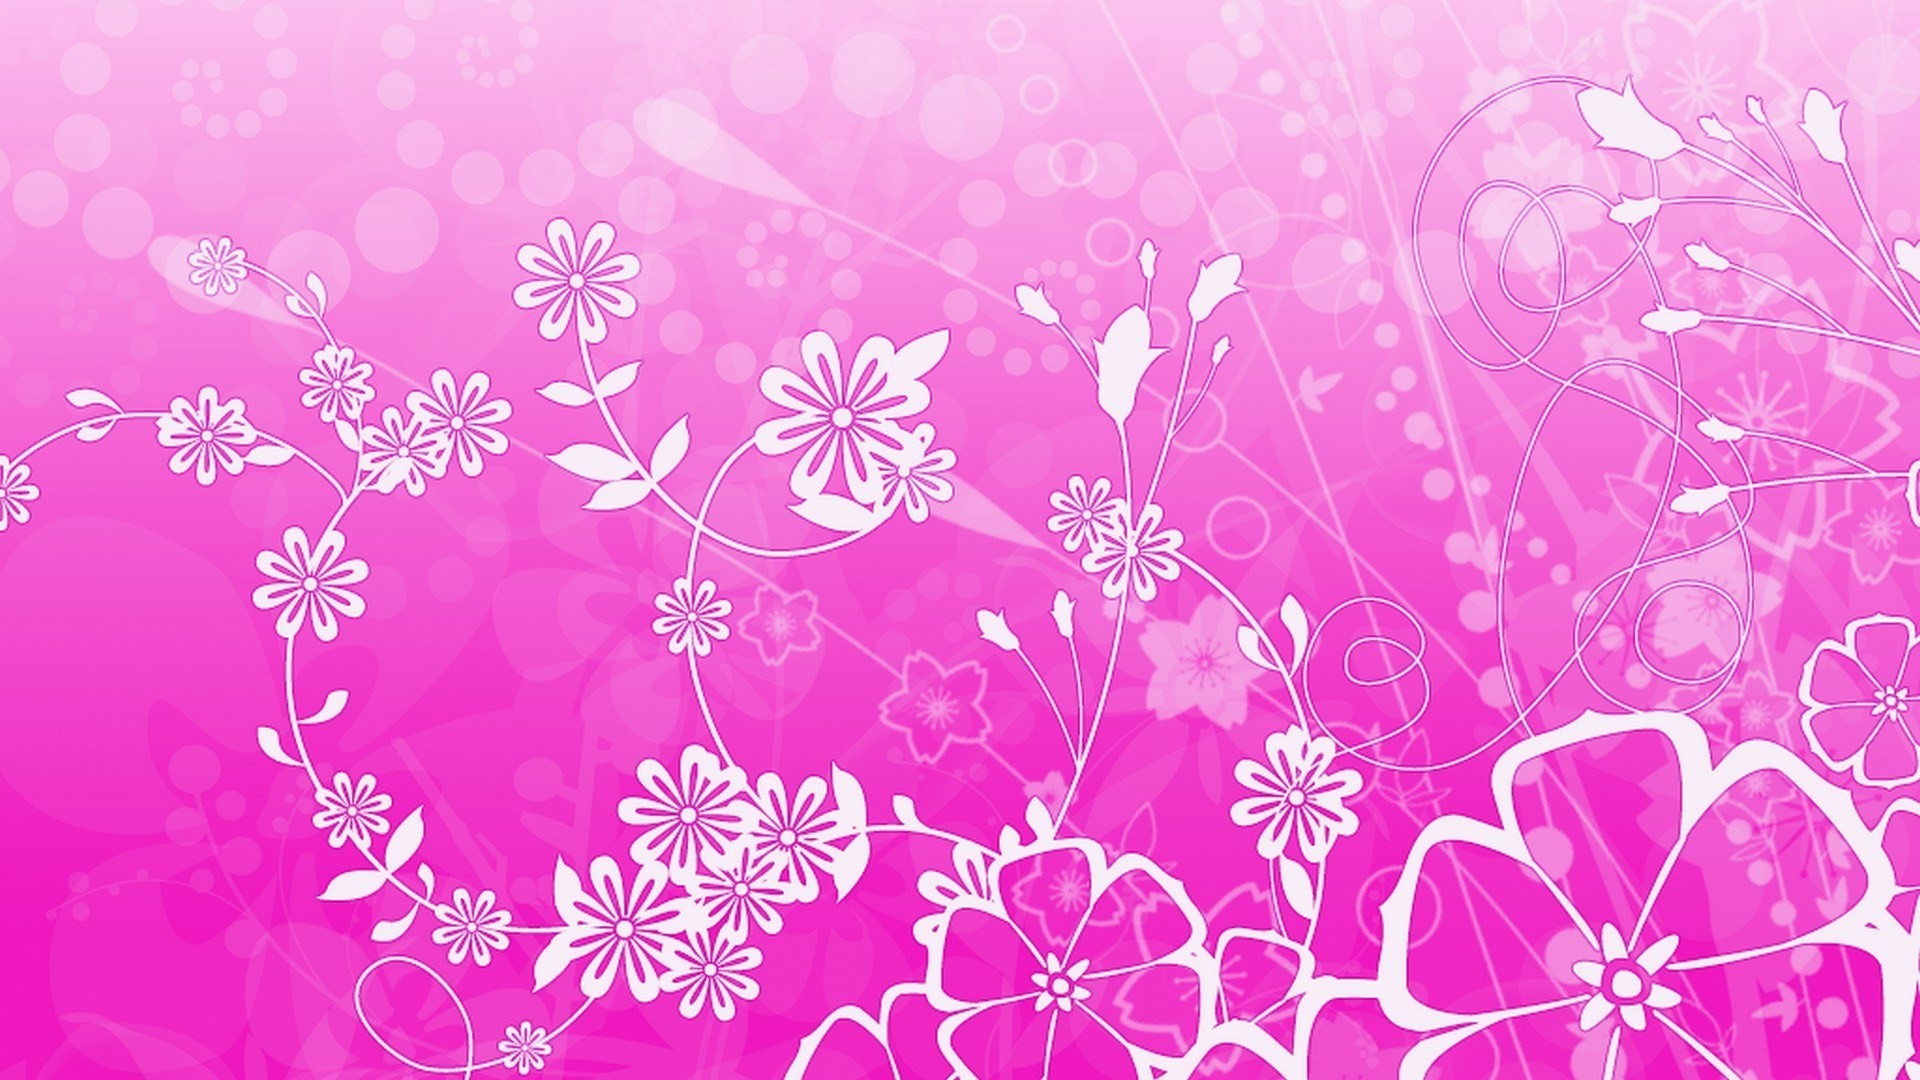 1920x1080 Pink Animated Flower Wallpaper 2019 Cute Wallpapers